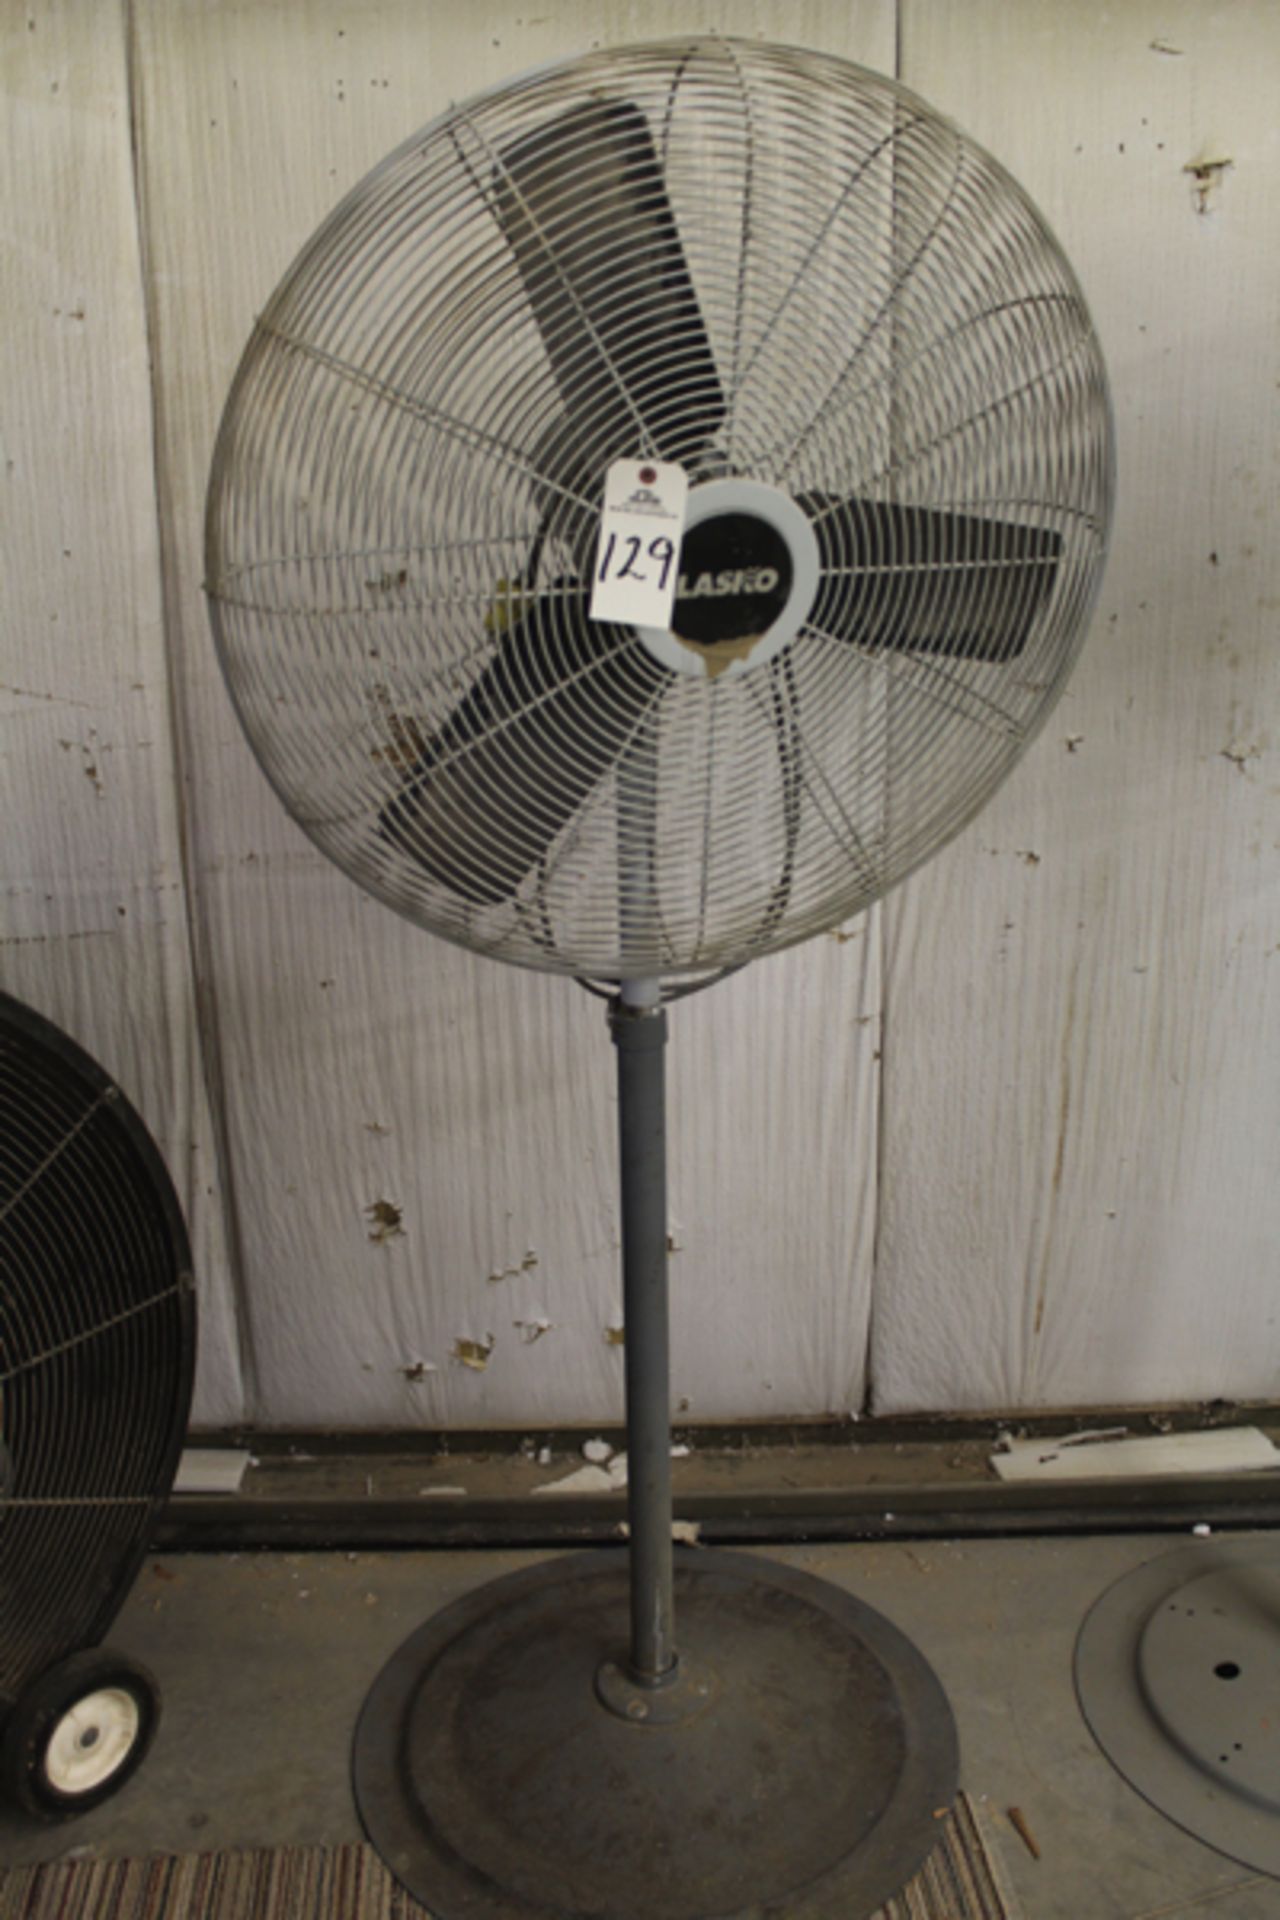 Pedestal Fan | Rigging Price: Hand Carry or Contact Rigger